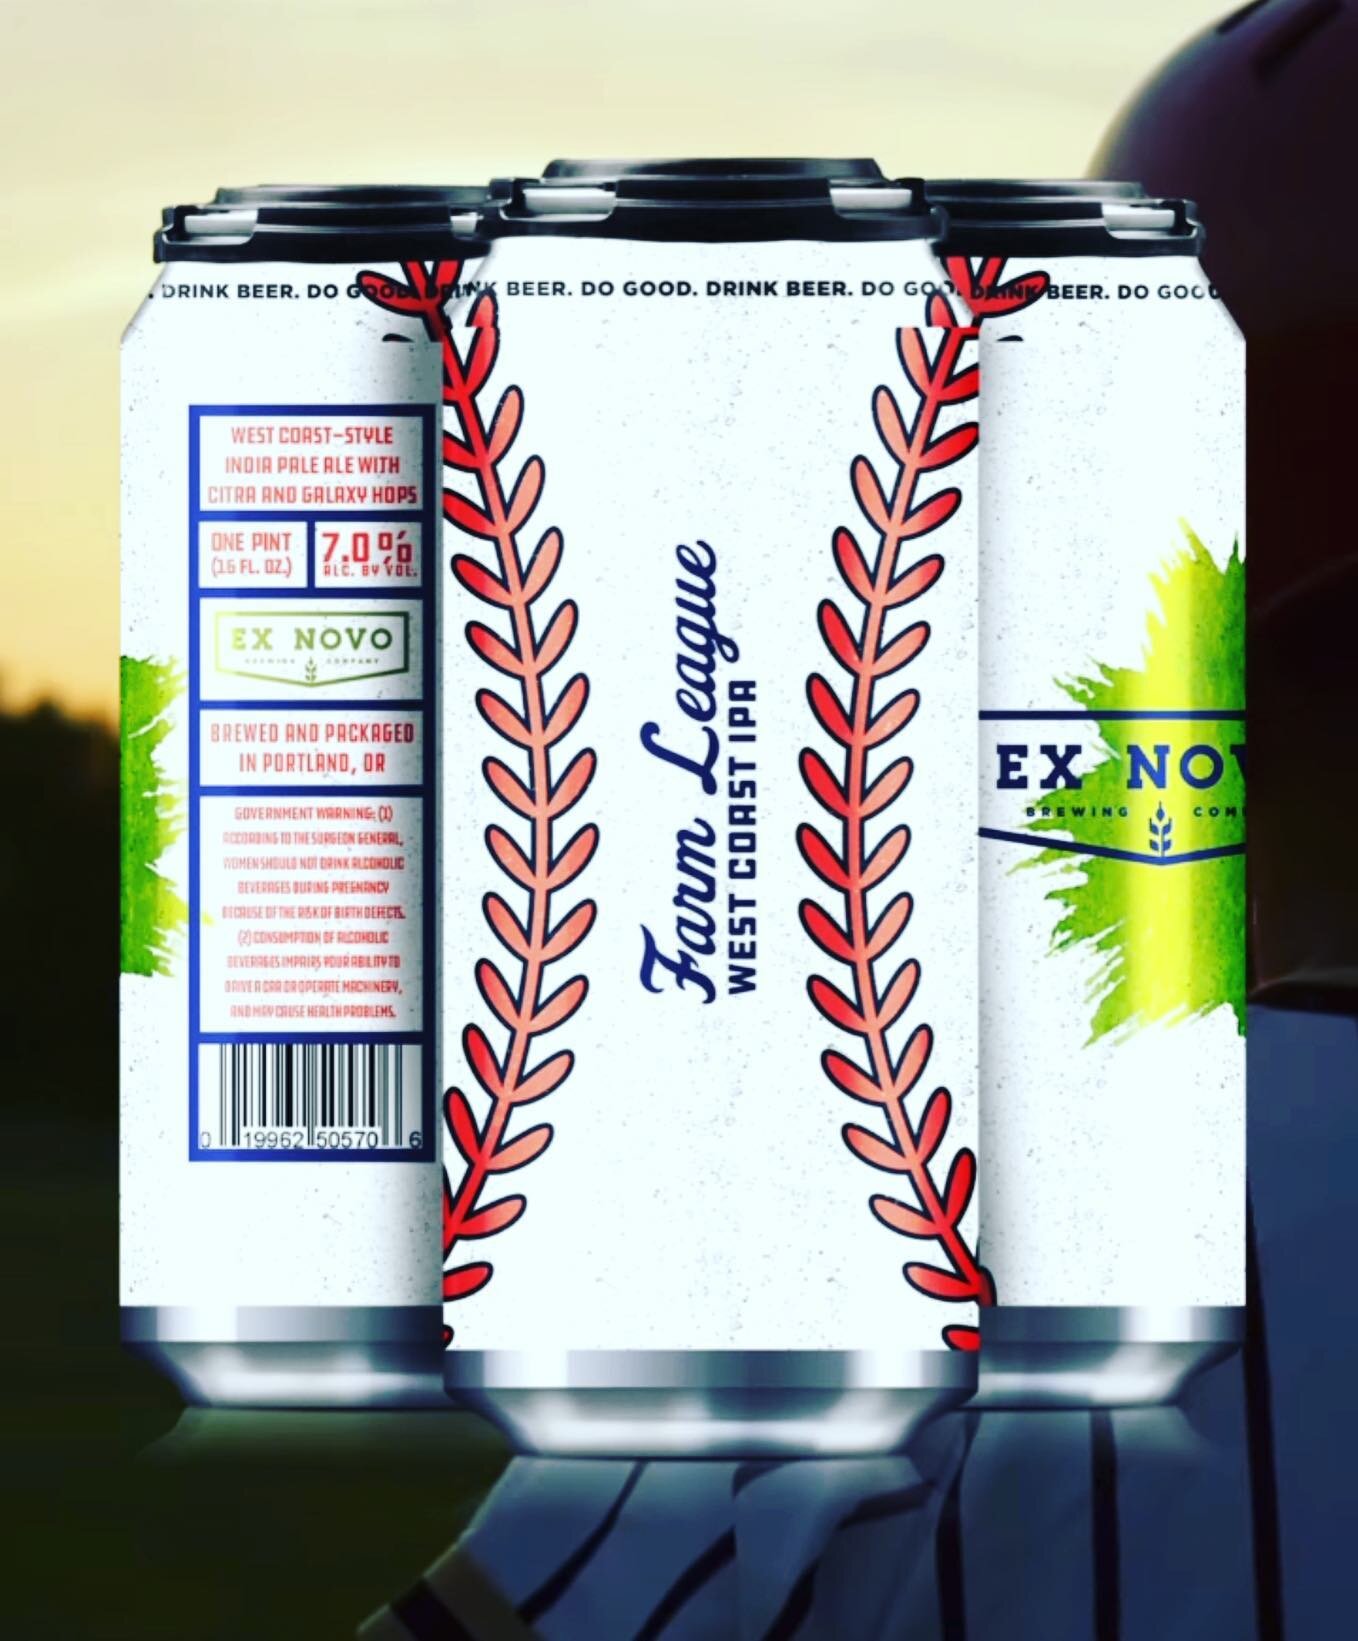 ⚾️ Farm League: West Coast IPA
Style: West Coast Style IPA
ABV: 7.0% ABV | IBU: 89
&ldquo;Our next hoppy offering packaged in 16 oz. shrink sleeve cans is this West Coast style IPA is clean, bitter, and finishes on the drier side but offers a large a